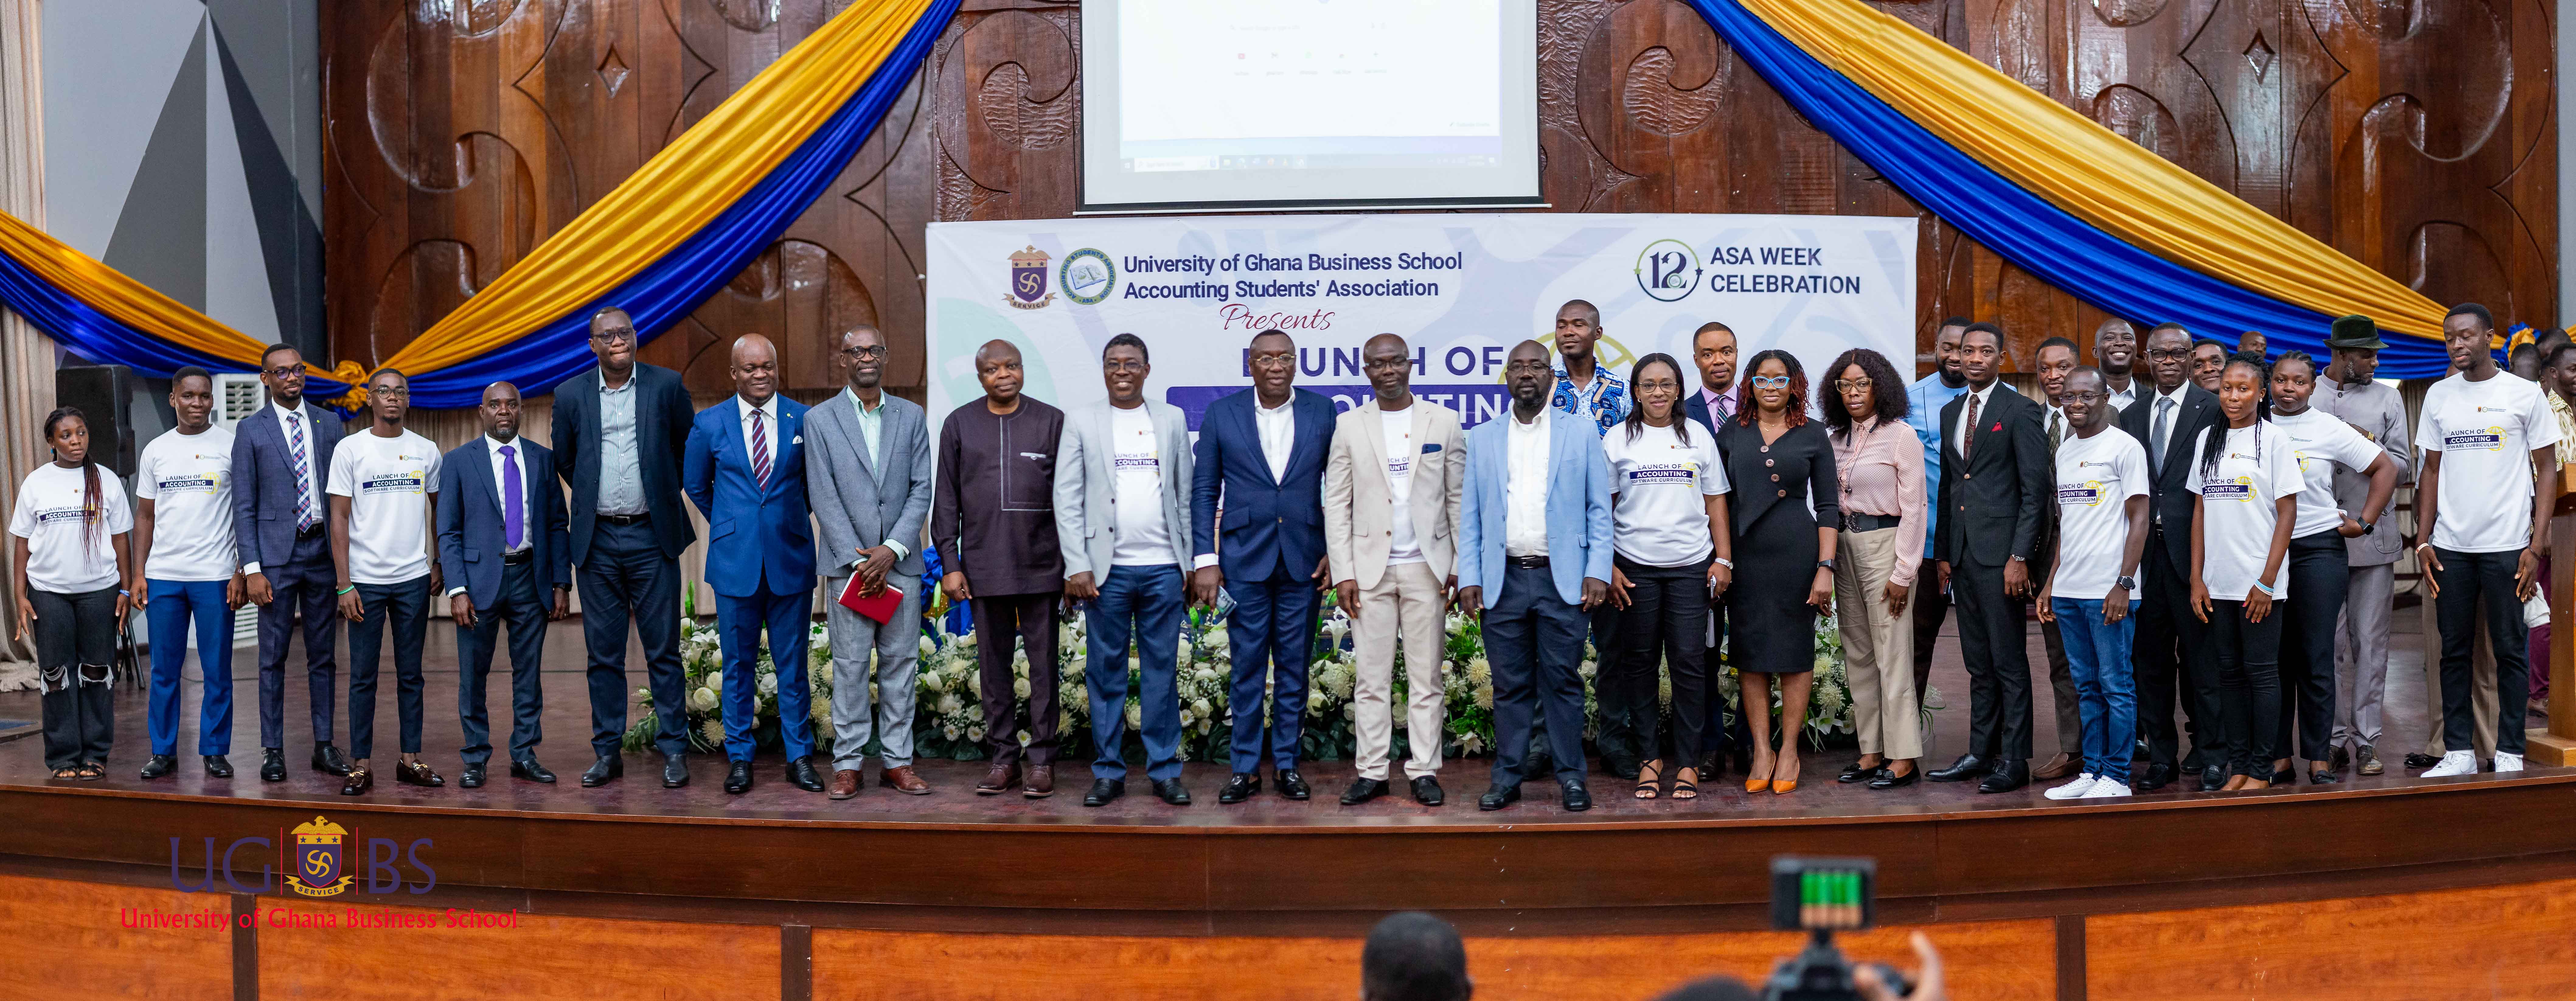 UGBS Department of Accounting Launches New Software Curriculum  